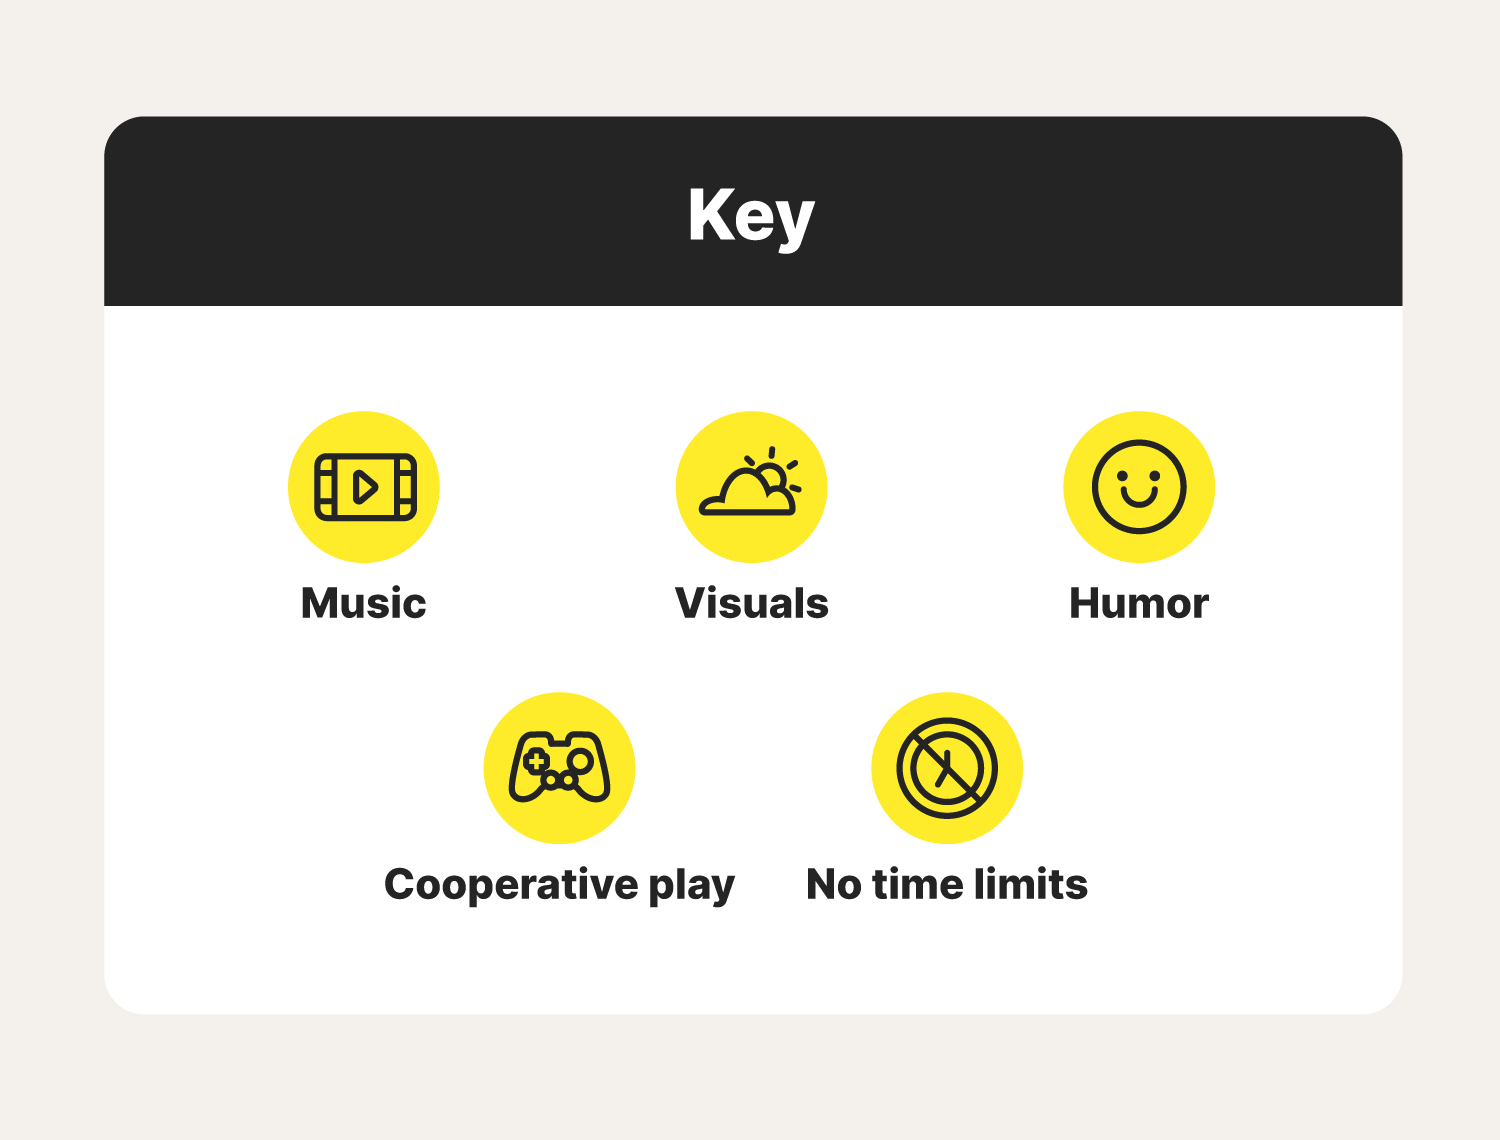 A key lays out the benefits of different relaxing games. 